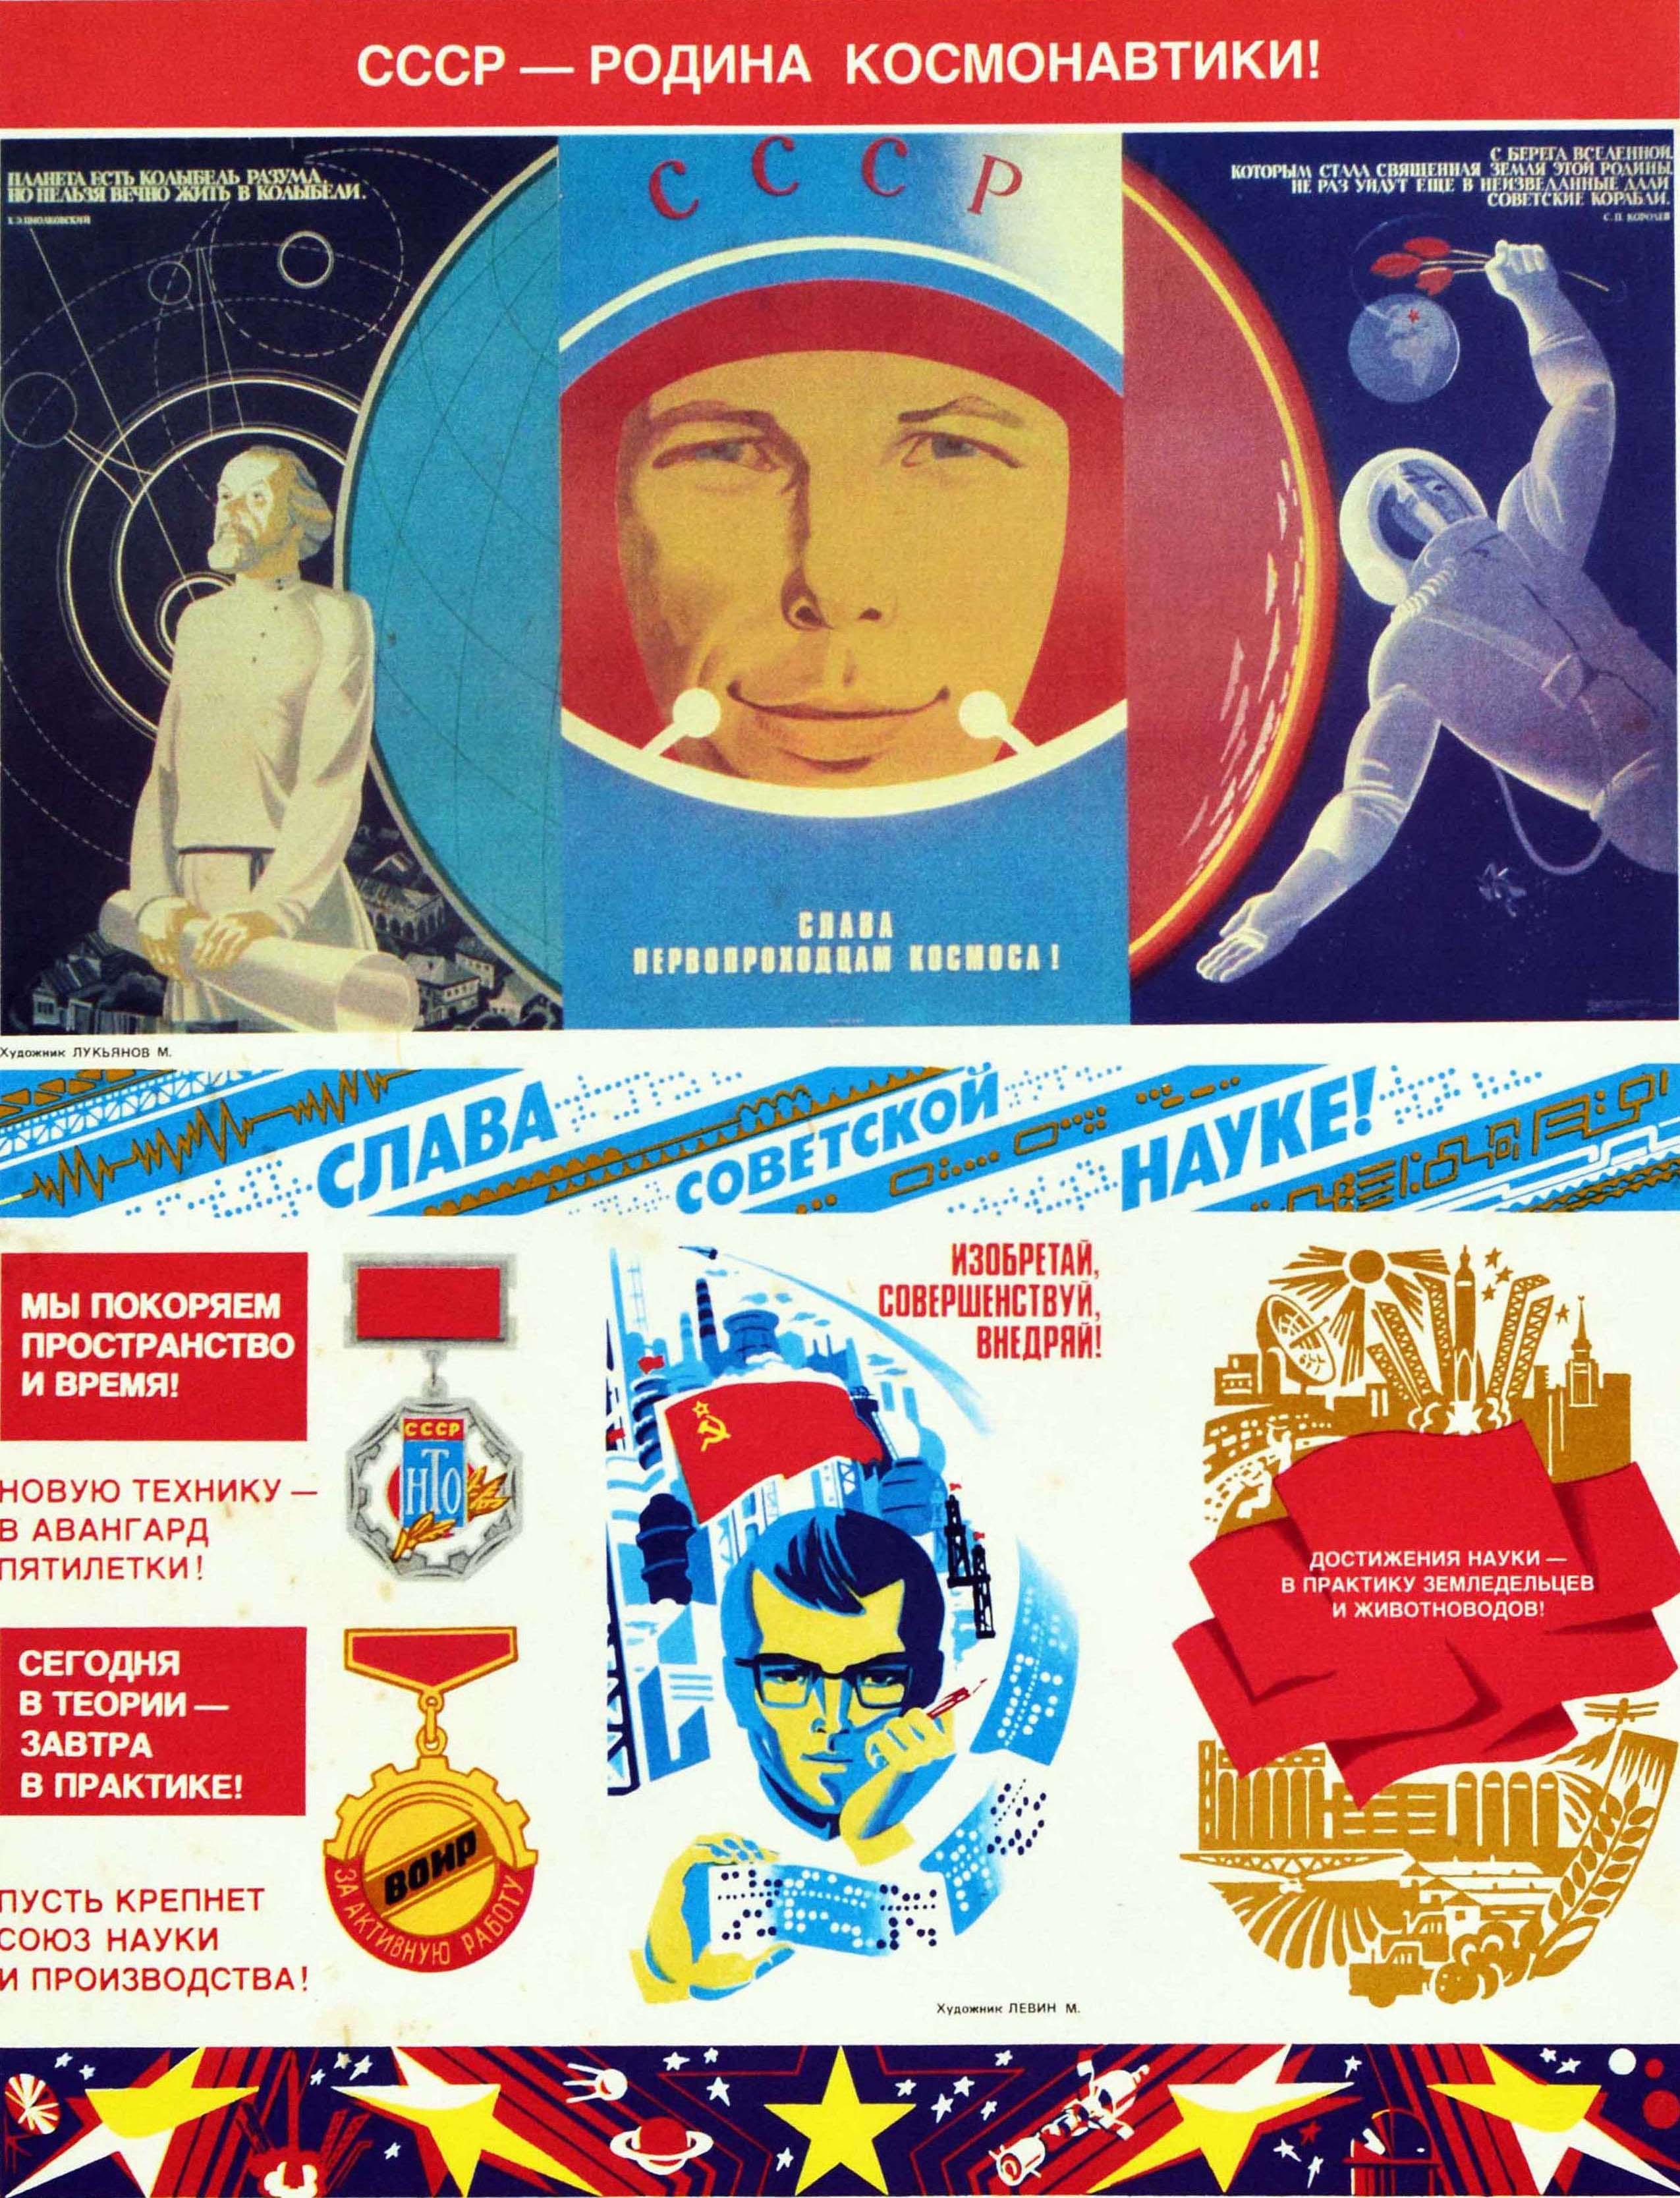 Original vintage propaganda poster commemorating scientific advances featuring a colourful illustration of cosmonauts and scientists with an image of Yuri Gagarin in the centre above diagonal computer code on punch cards and stars, spacecraft and